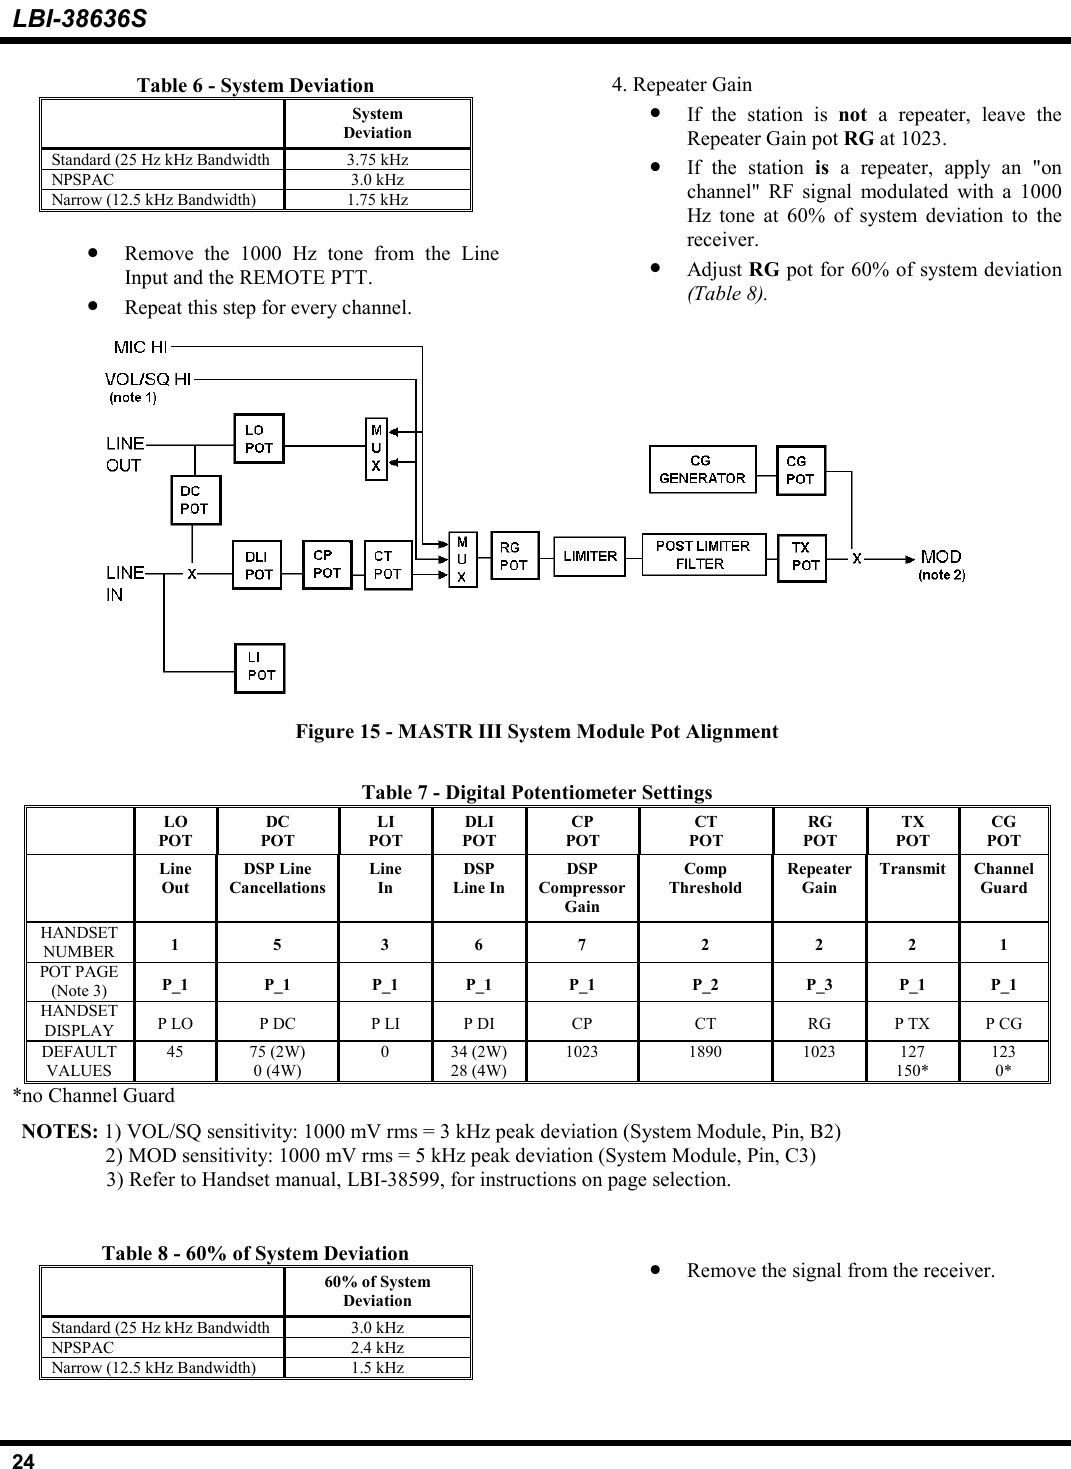 LBI-38636S24Table 6 - System DeviationSystemDeviationStandard (25 Hz kHz Bandwidth 3.75 kHzNPSPAC 3.0 kHzNarrow (12.5 kHz Bandwidth) 1.75 kHz• Remove the 1000 Hz tone from the LineInput and the REMOTE PTT.• Repeat this step for every channel.4. Repeater Gain• If the station is not  a repeater, leave theRepeater Gain pot RG at 1023.• If the station is  a repeater, apply an &quot;onchannel&quot; RF signal modulated with a 1000Hz tone at 60% of system deviation to thereceiver.• Adjust RG pot for 60% of system deviation(Table 8).Figure 15 - MASTR III System Module Pot AlignmentTable 7 - Digital Potentiometer SettingsLOPOTDCPOTLIPOTDLIPOTCPPOTCTPOTRGPOTTXPOTCGPOTLineOutDSP LineCancellationsLineInDSPLine InDSPCompressorGainCompThresholdRepeaterGainTransmit ChannelGuardHANDSETNUMBER 15 367 2 221POT PAGE(Note 3) P_1 P_1 P_1 P_1 P_1 P_2 P_3 P_1 P_1HANDSETDISPLAY P LO P DC P LI P DI CP CT RG P TX P CGDEFAULTVALUES45 75 (2W)0 (4W)034 (2W)28 (4W)1023 1890 1023 127150*1230**no Channel GuardNOTES: 1) VOL/SQ sensitivity: 1000 mV rms = 3 kHz peak deviation (System Module, Pin, B2)2) MOD sensitivity: 1000 mV rms = 5 kHz peak deviation (System Module, Pin, C3)3) Refer to Handset manual, LBI-38599, for instructions on page selection.Table 8 - 60% of System Deviation60% of SystemDeviationStandard (25 Hz kHz Bandwidth 3.0 kHzNPSPAC 2.4 kHzNarrow (12.5 kHz Bandwidth) 1.5 kHz• Remove the signal from the receiver.